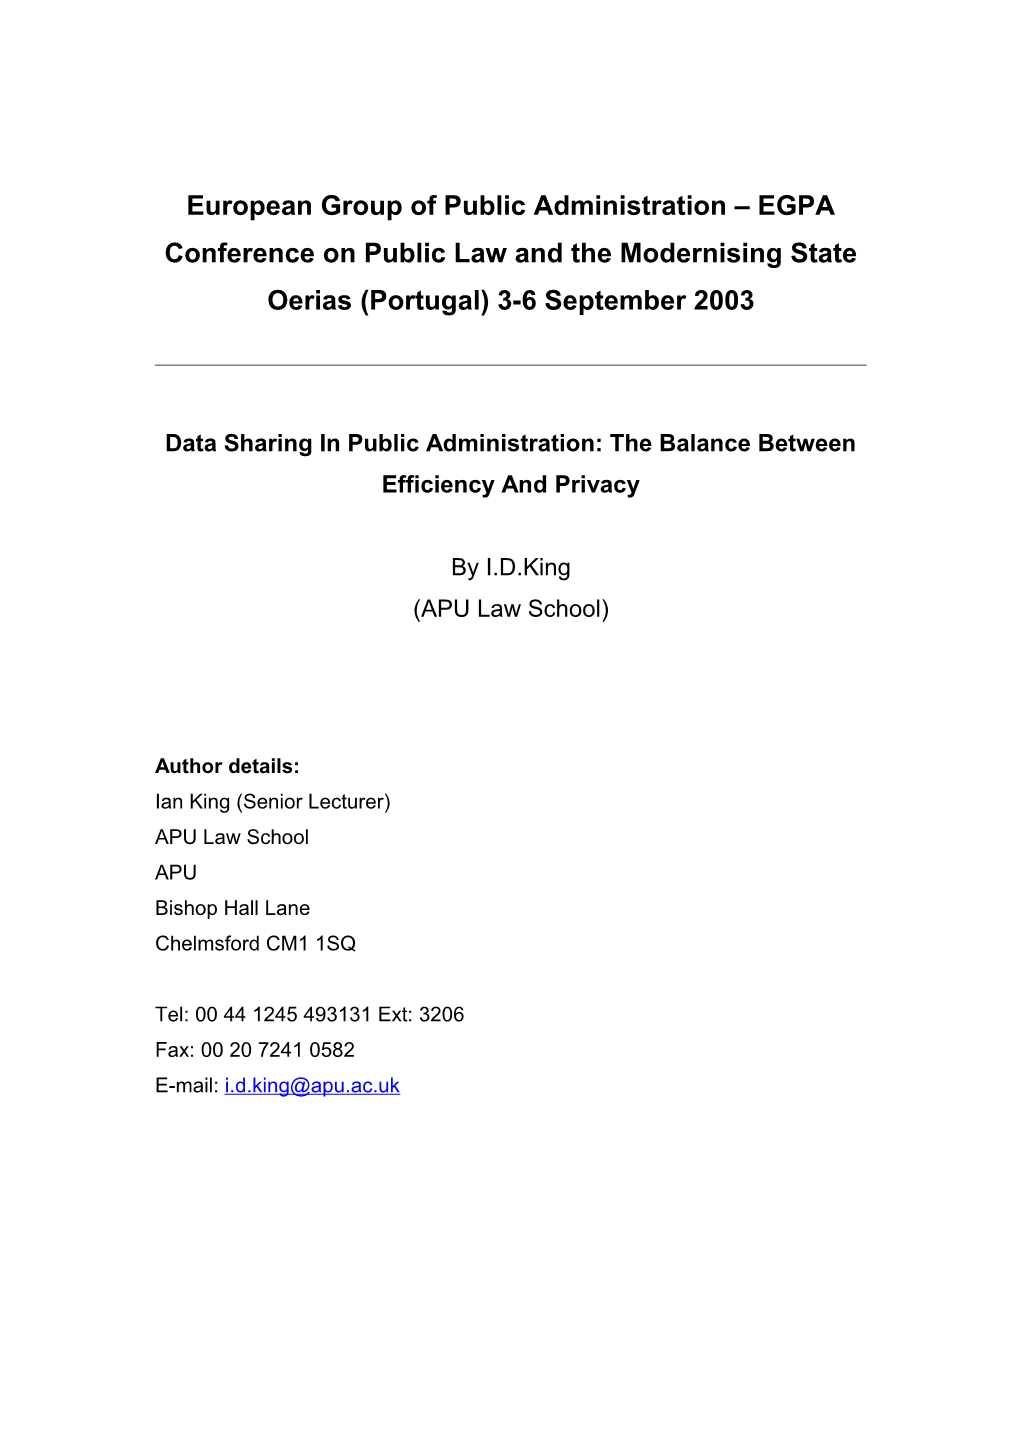 Data Sharing in Public Administration: the Balance Between Efficiency and Privacy